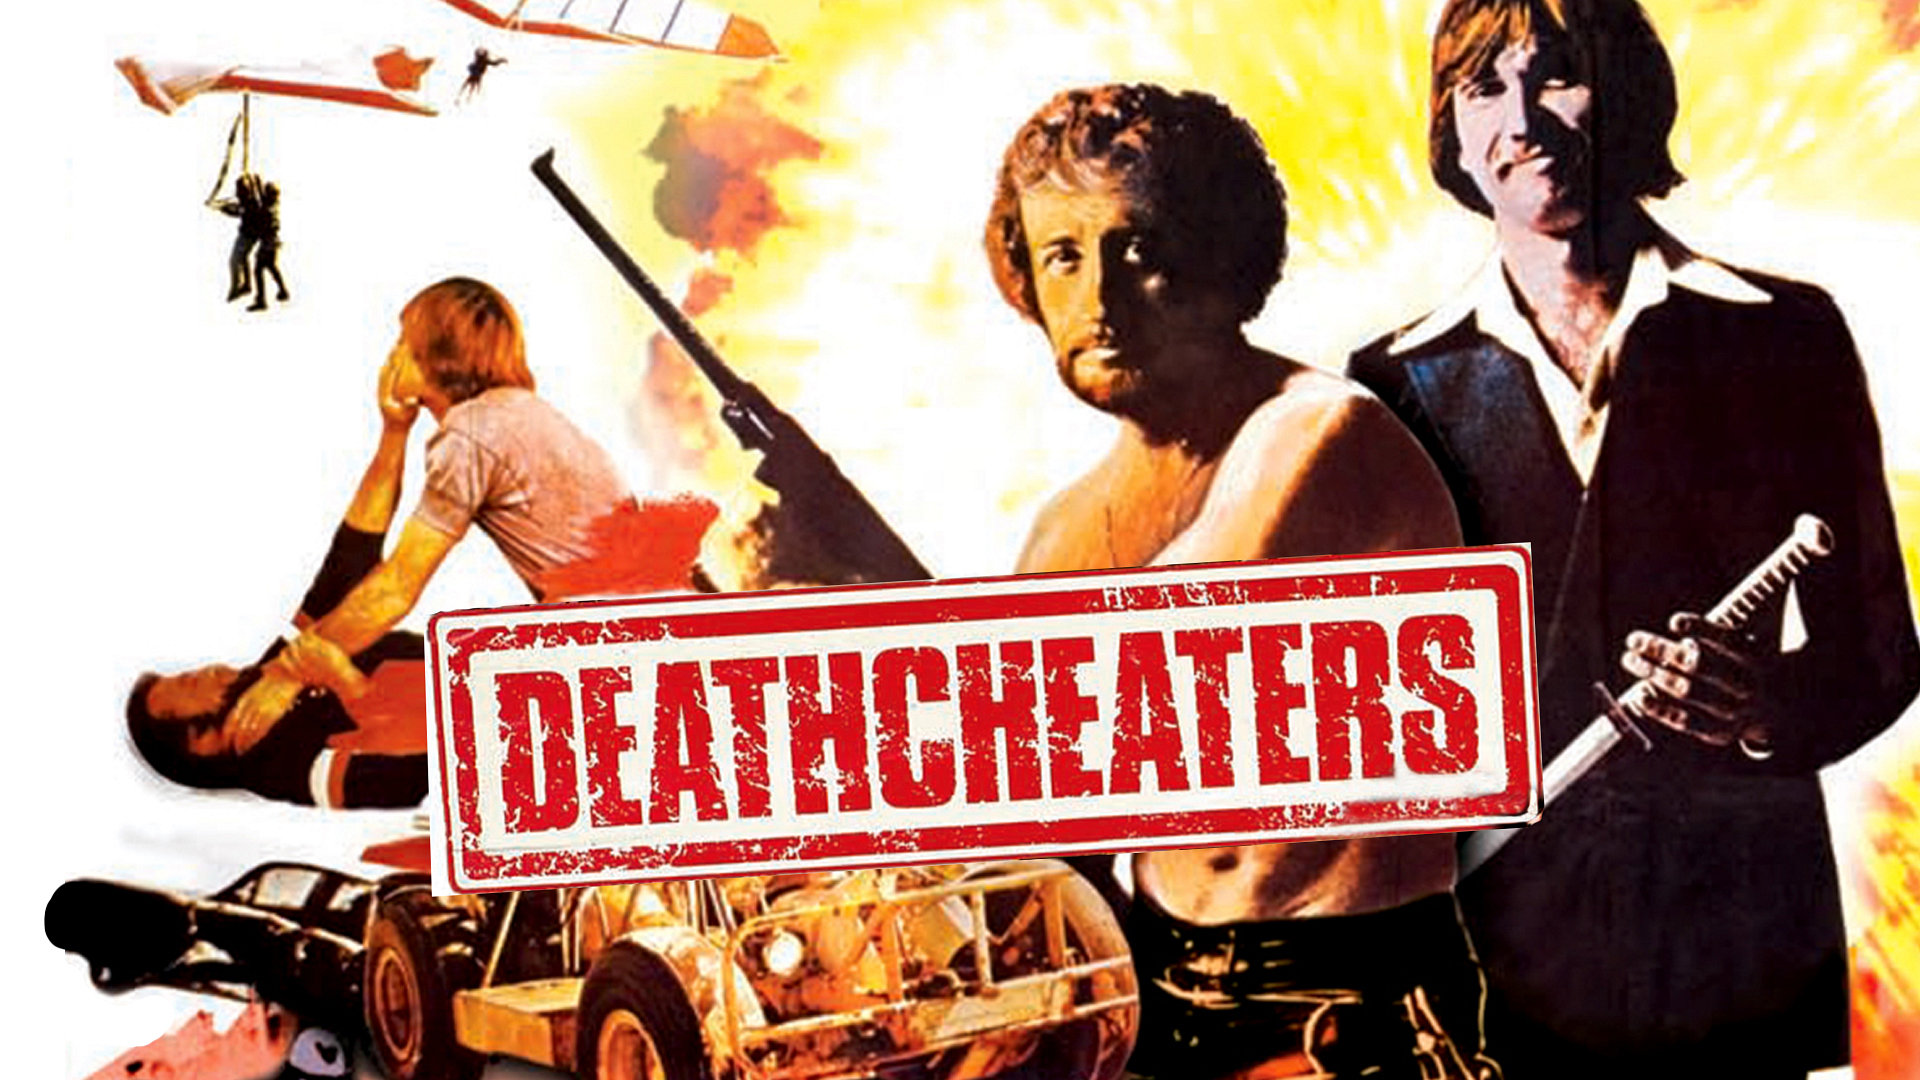 Death Cheaters